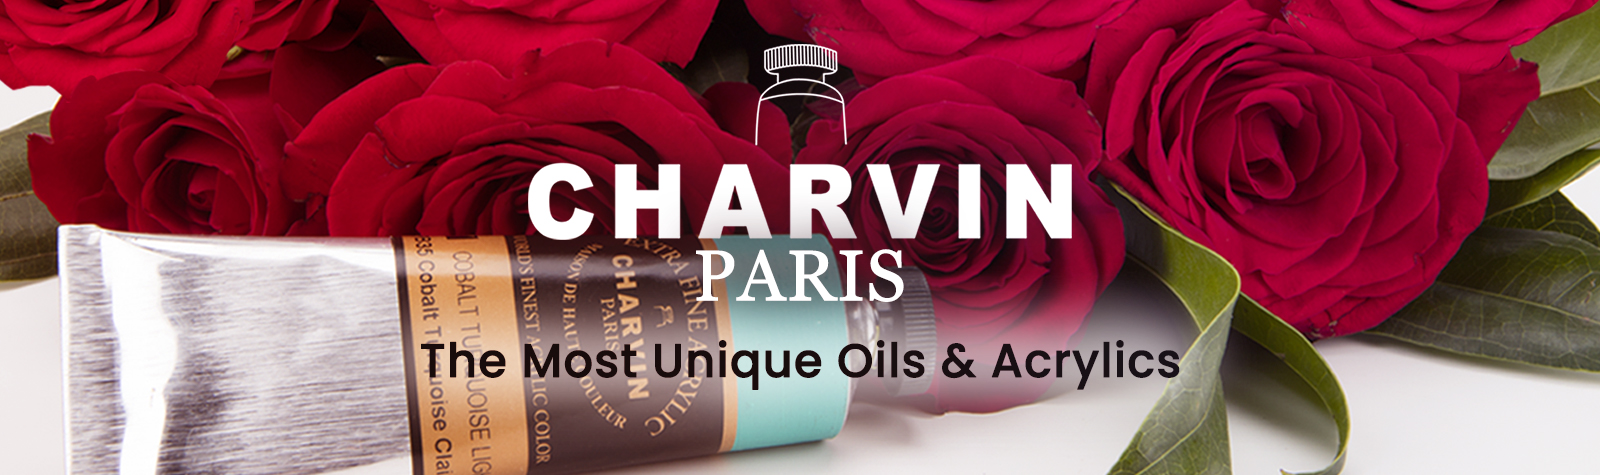 Charvin Savings on Oil and Acrylic Paints Winter Sale 